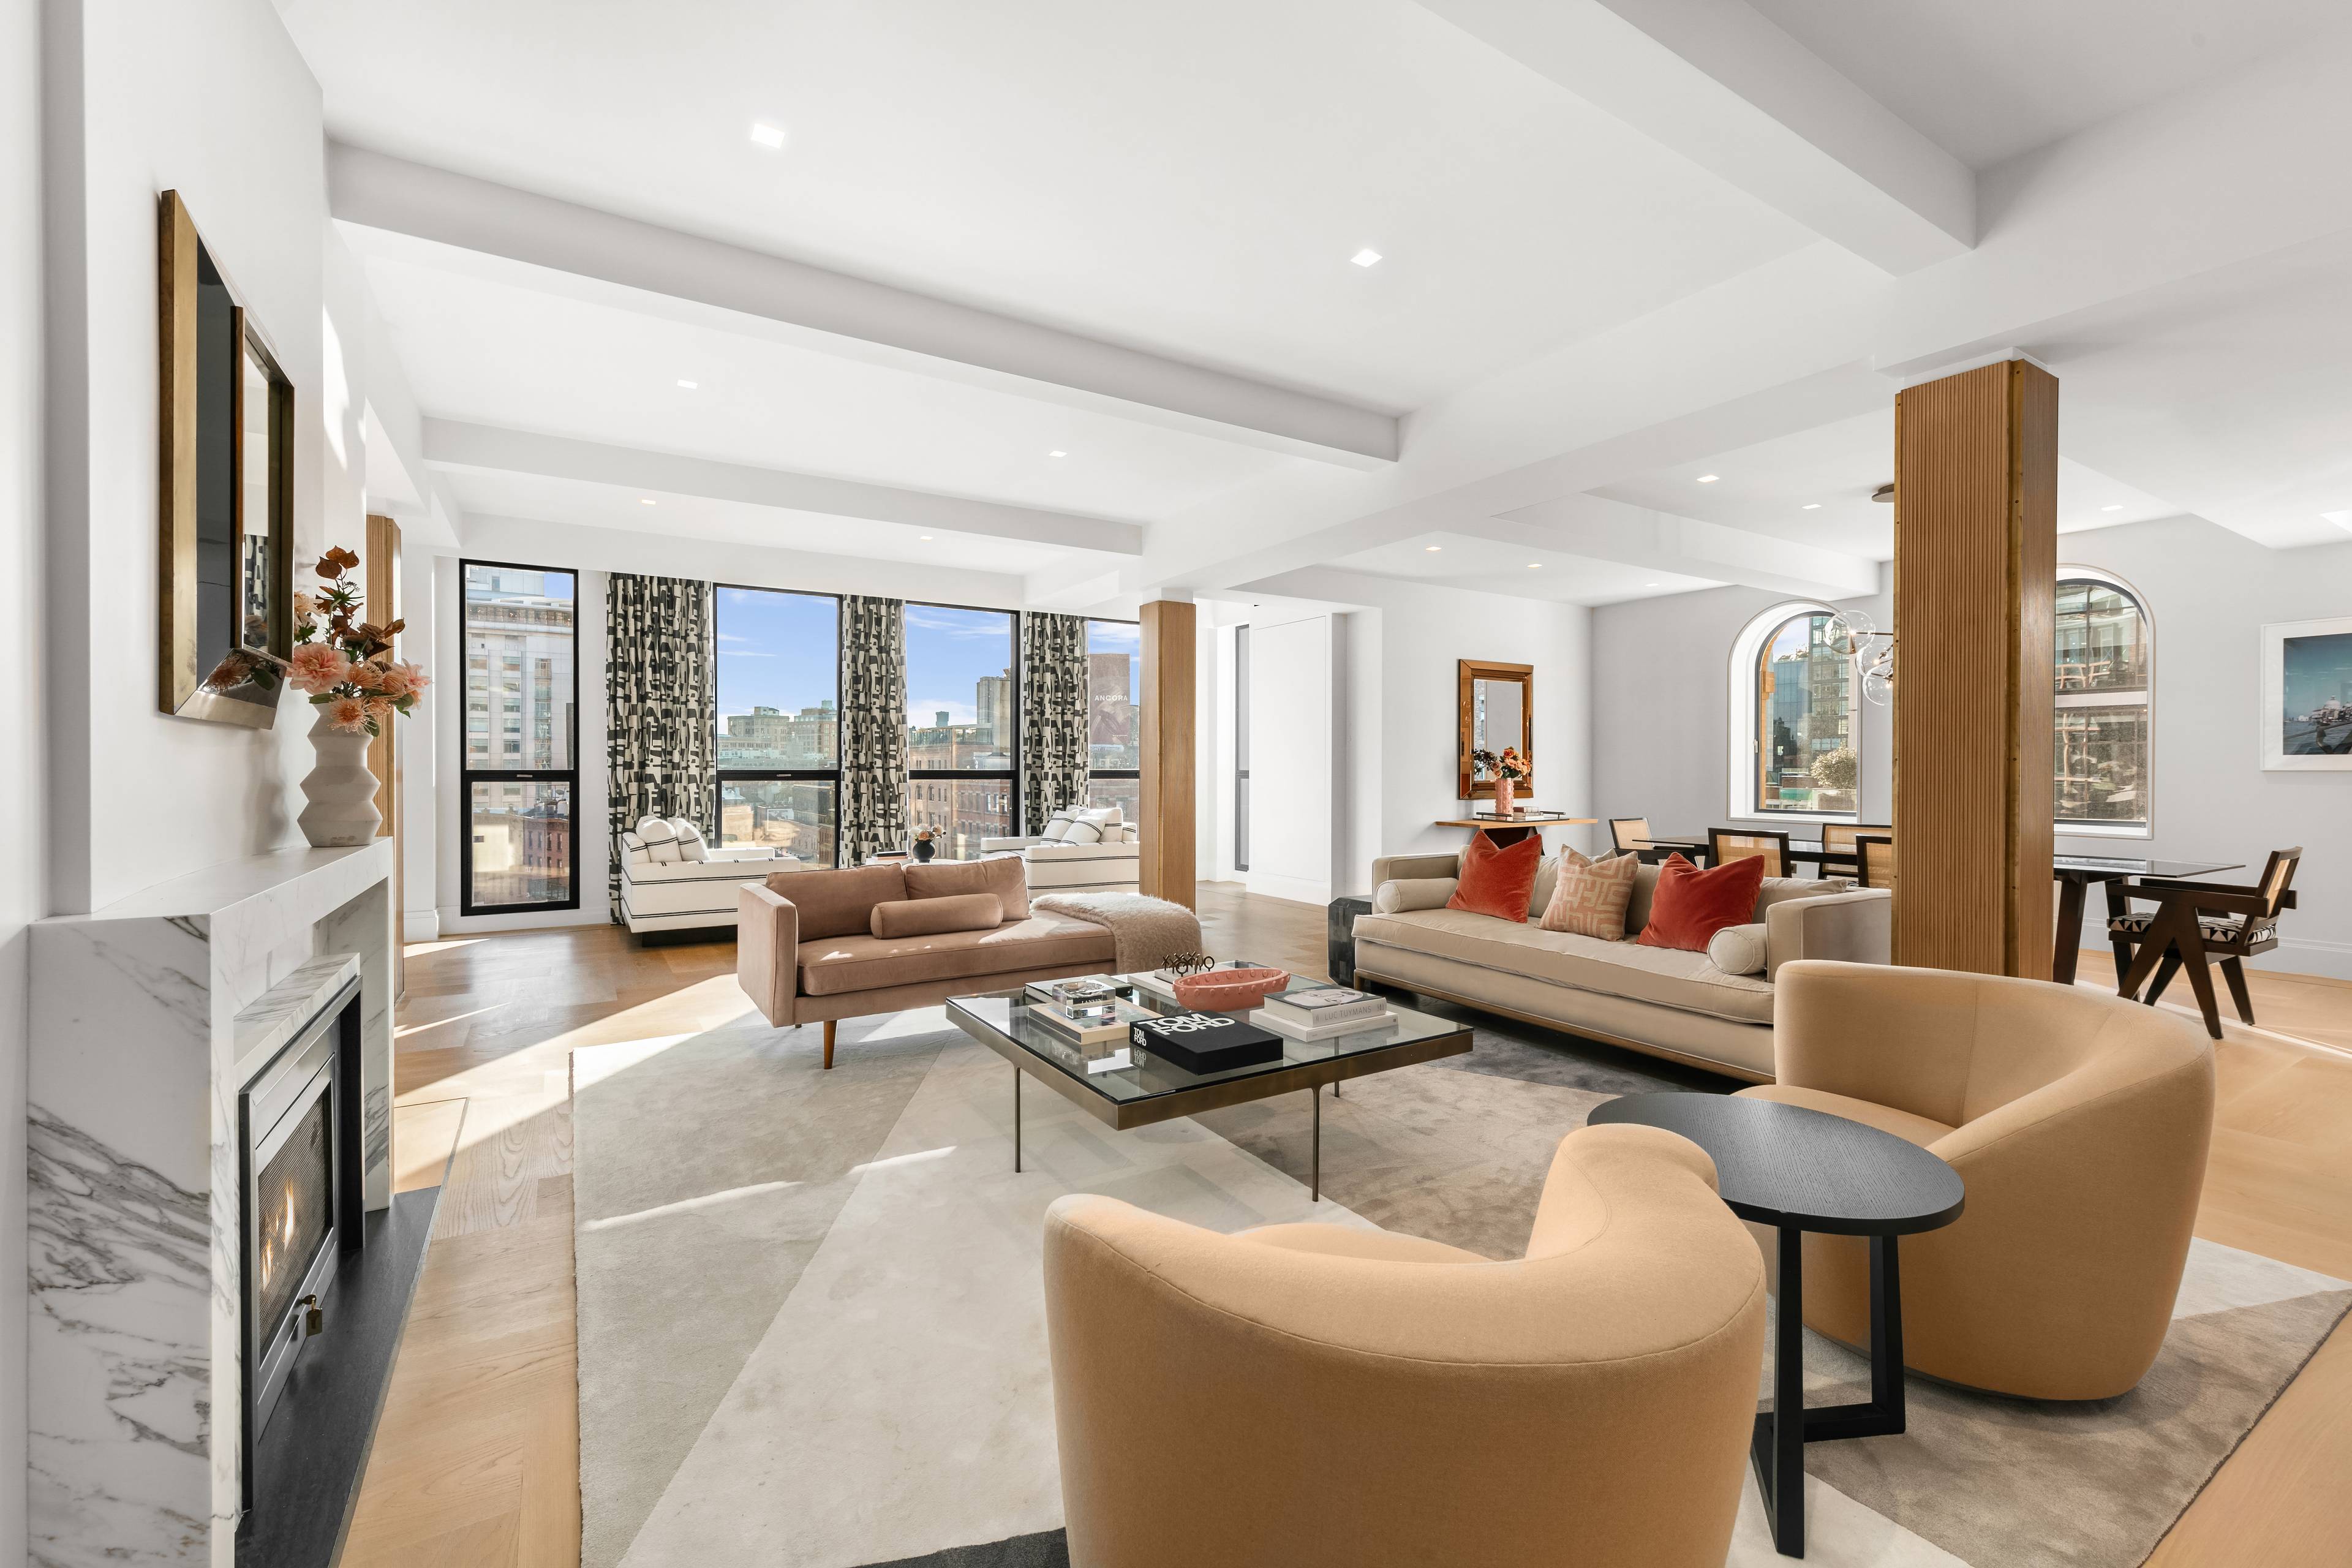 66 NINTH AVENUE | CONCIERGE LEVEL BOUTIQUE CONDO | 5,444SF FULL FLOOR 5 BEDROOM with PRIVATE TERRACE |